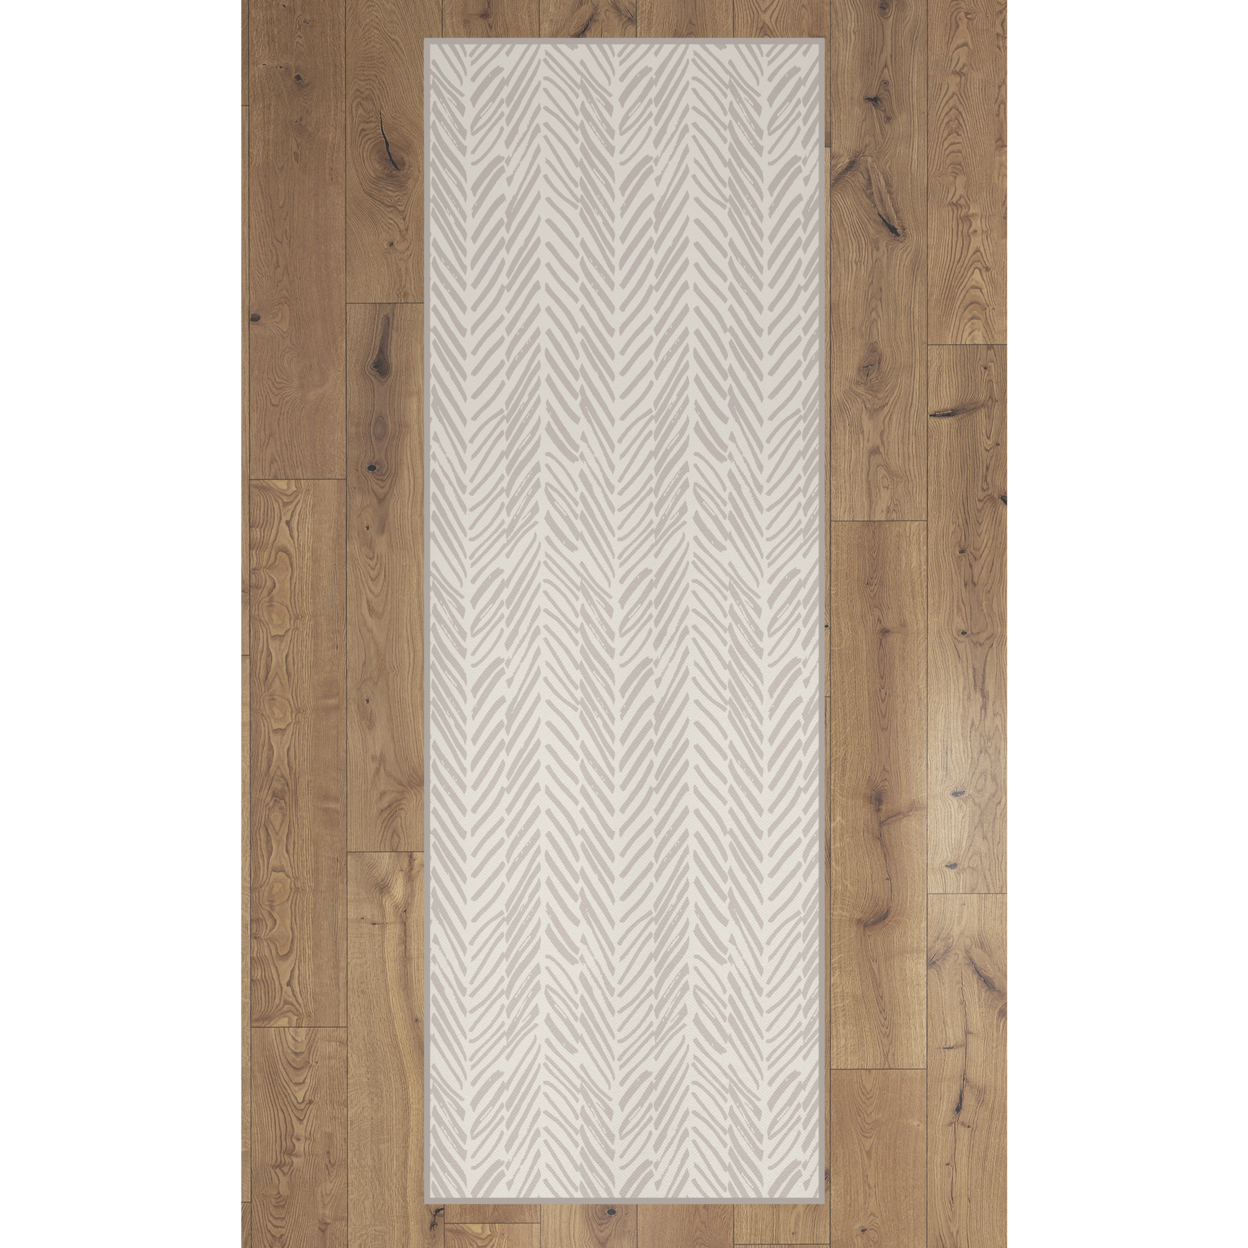 Deerlux Modern Living Room Area Rug With Nonslip Backing, Abstract Beige Chevron Strokes Pattern - 2.5 X 6.5